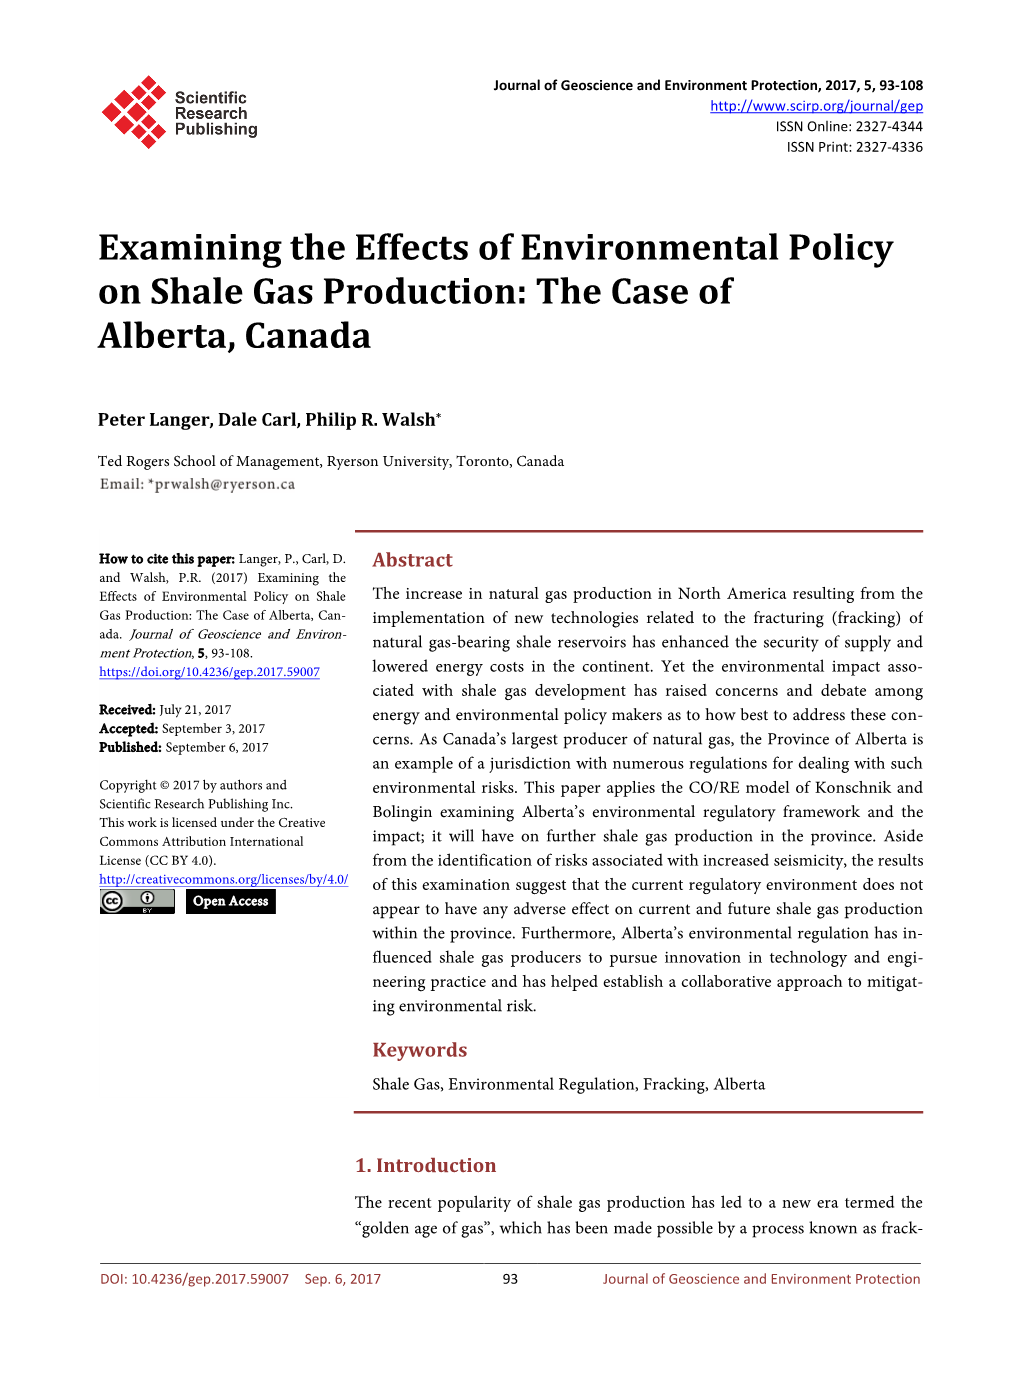 Examining the Effects of Environmental Policy on Shale Gas Production: the Case of Alberta, Canada